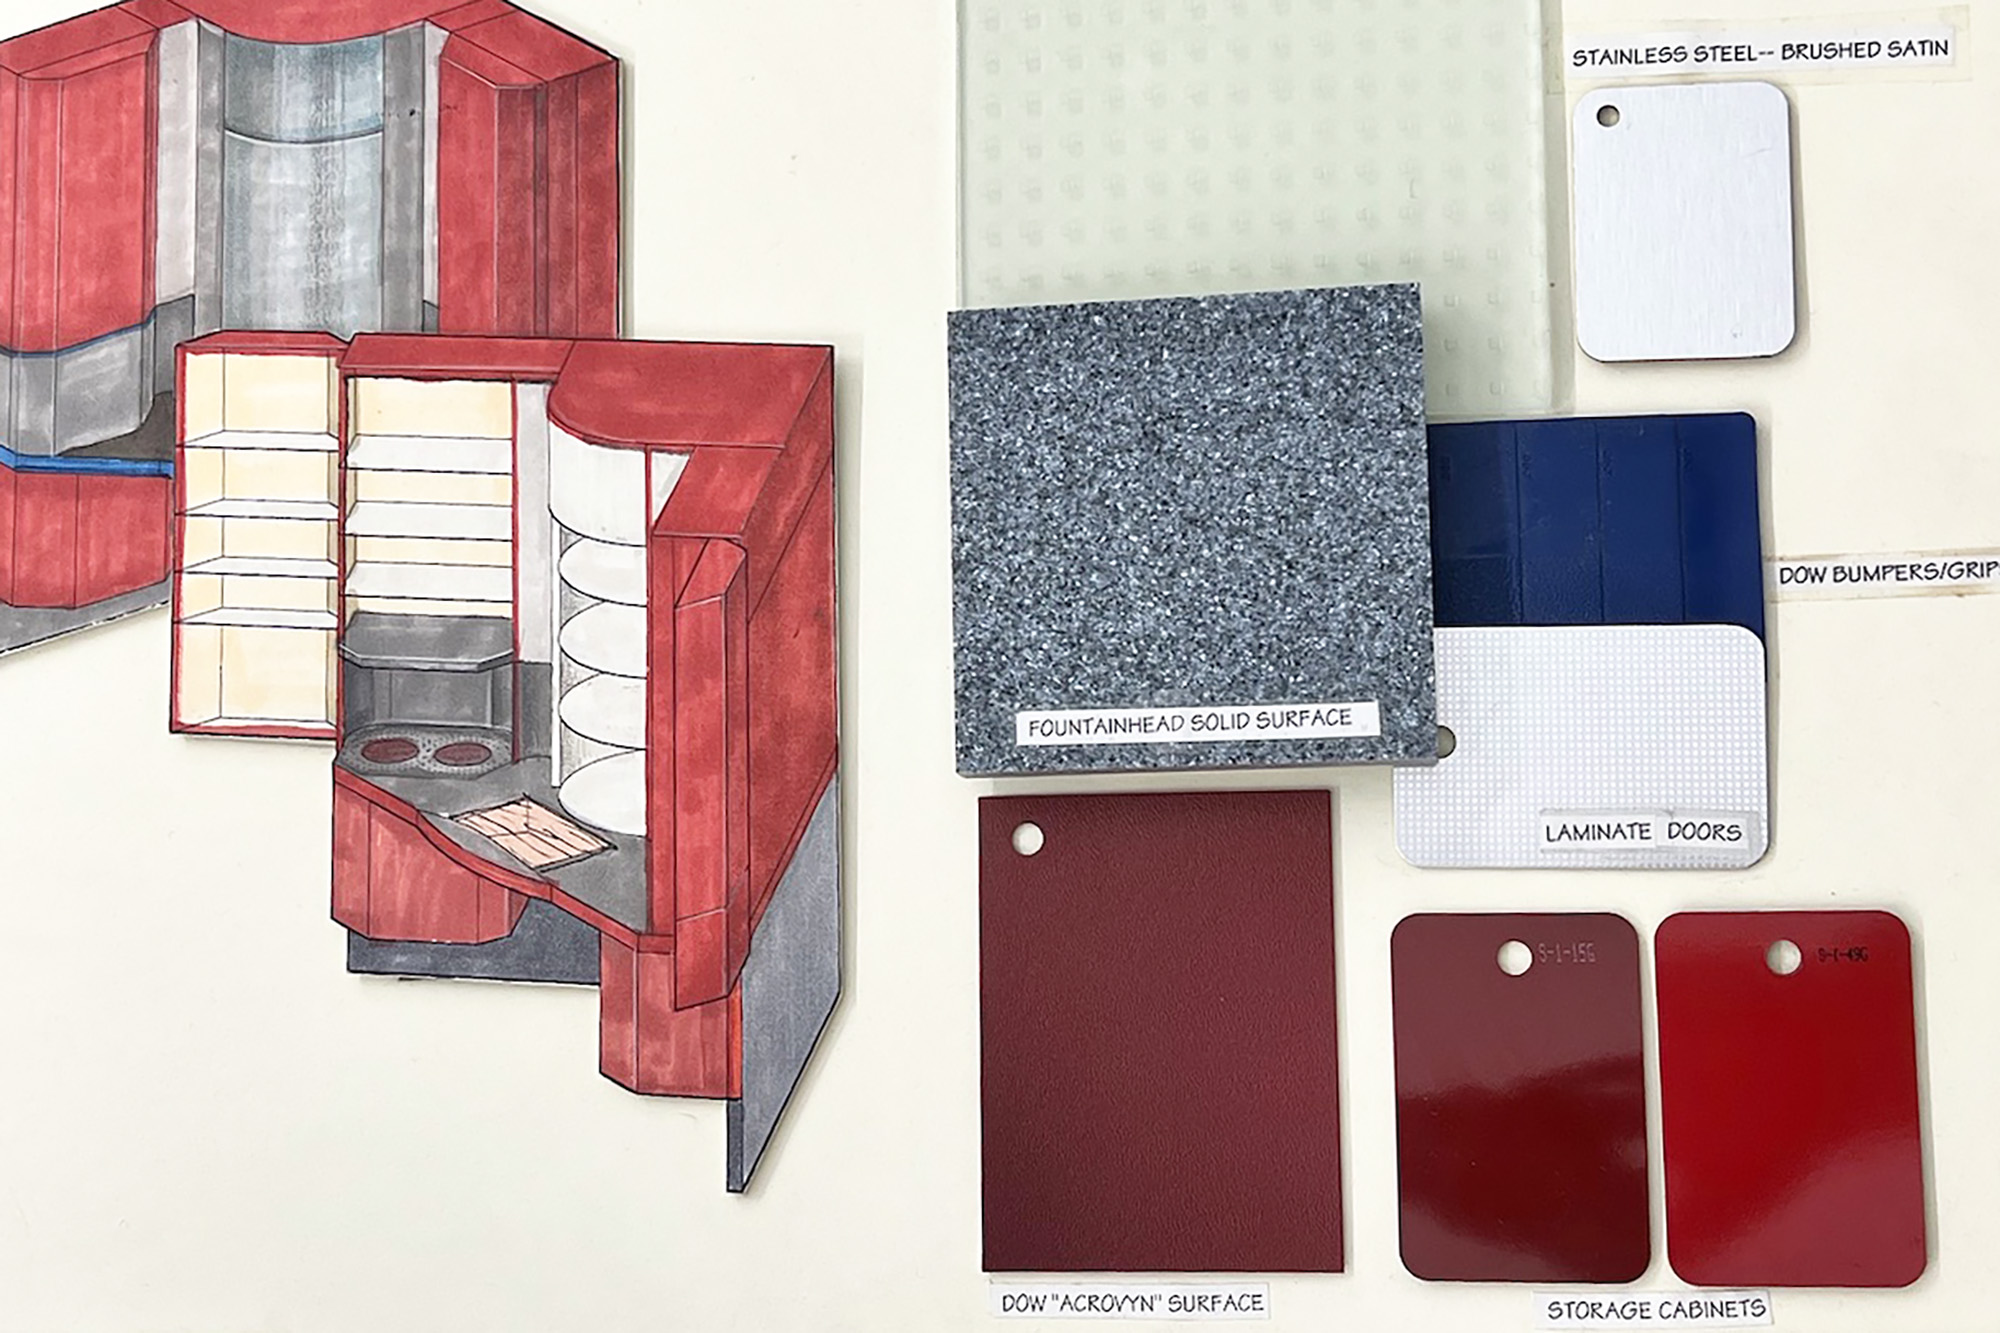 material selections for the original Universal Kitchen design